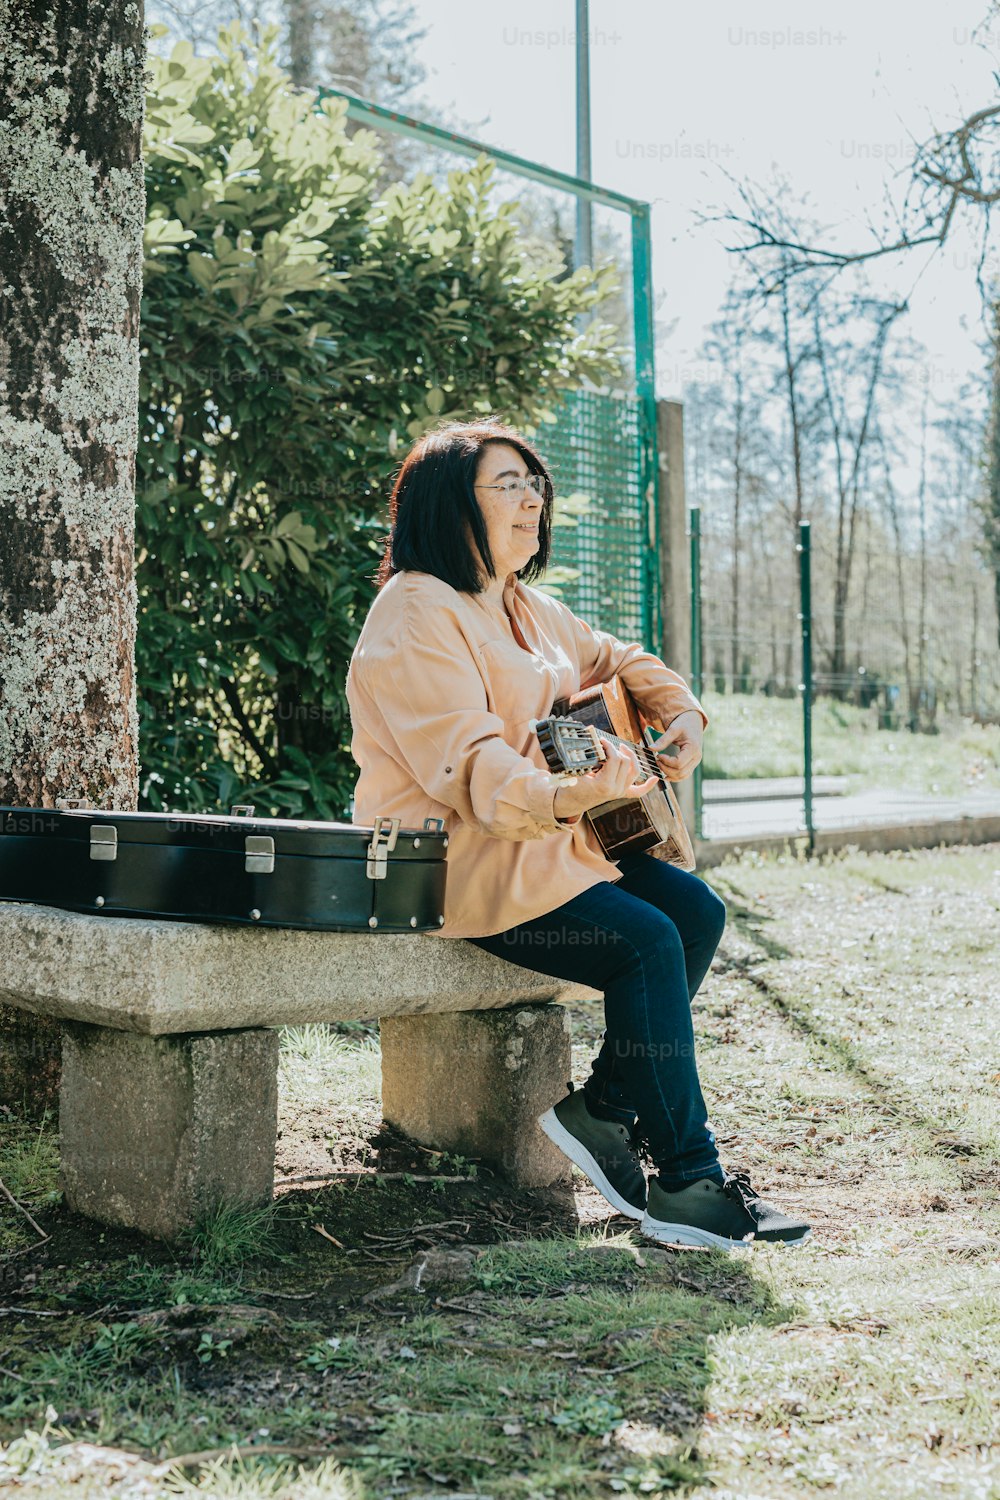 a woman sitting on a cement bench holding a guitar